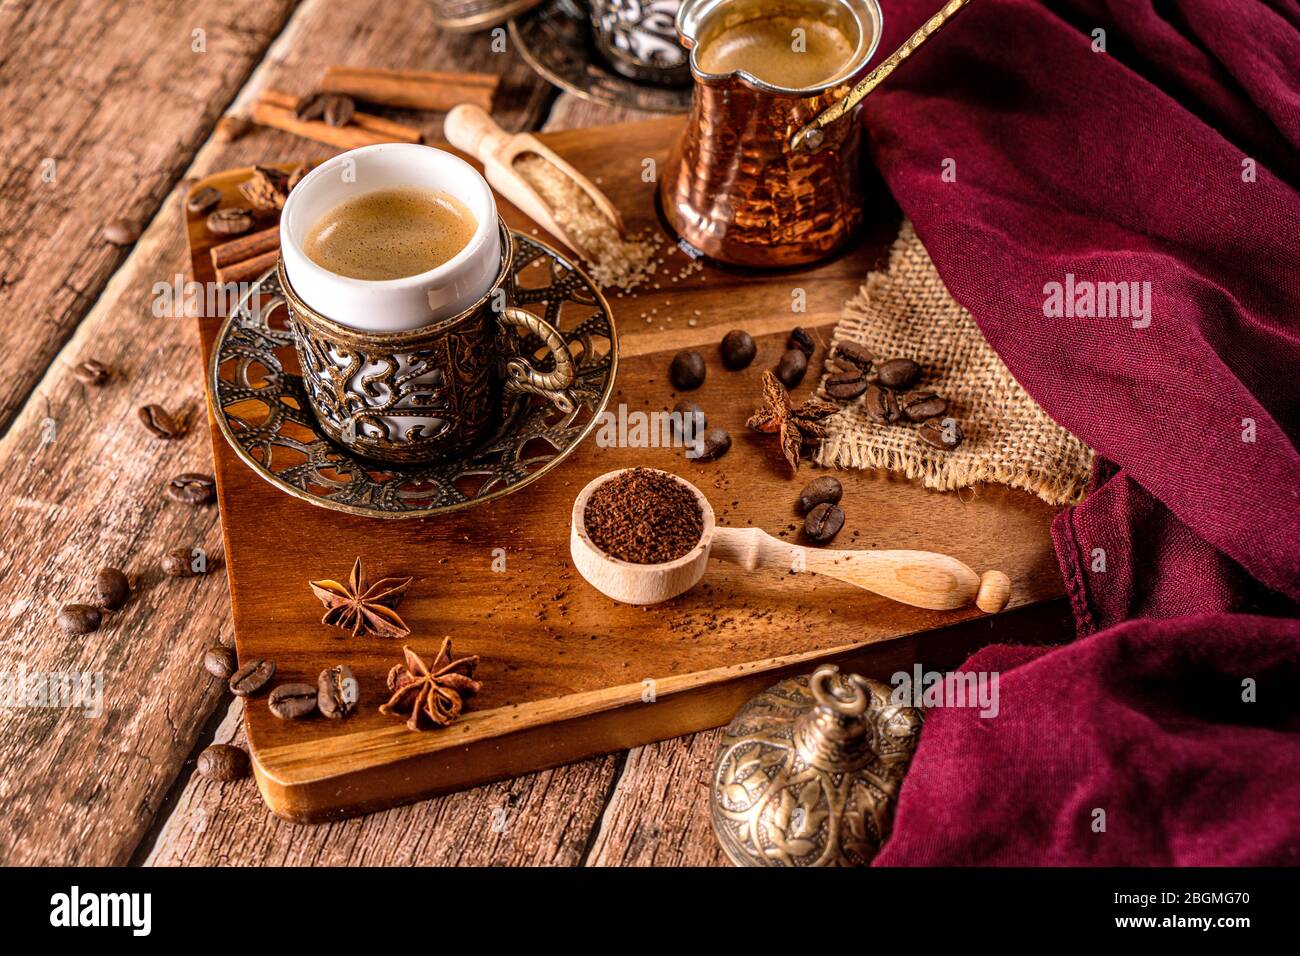 Detail of a cup of coffee and coffee beans on wood background Stock Photo